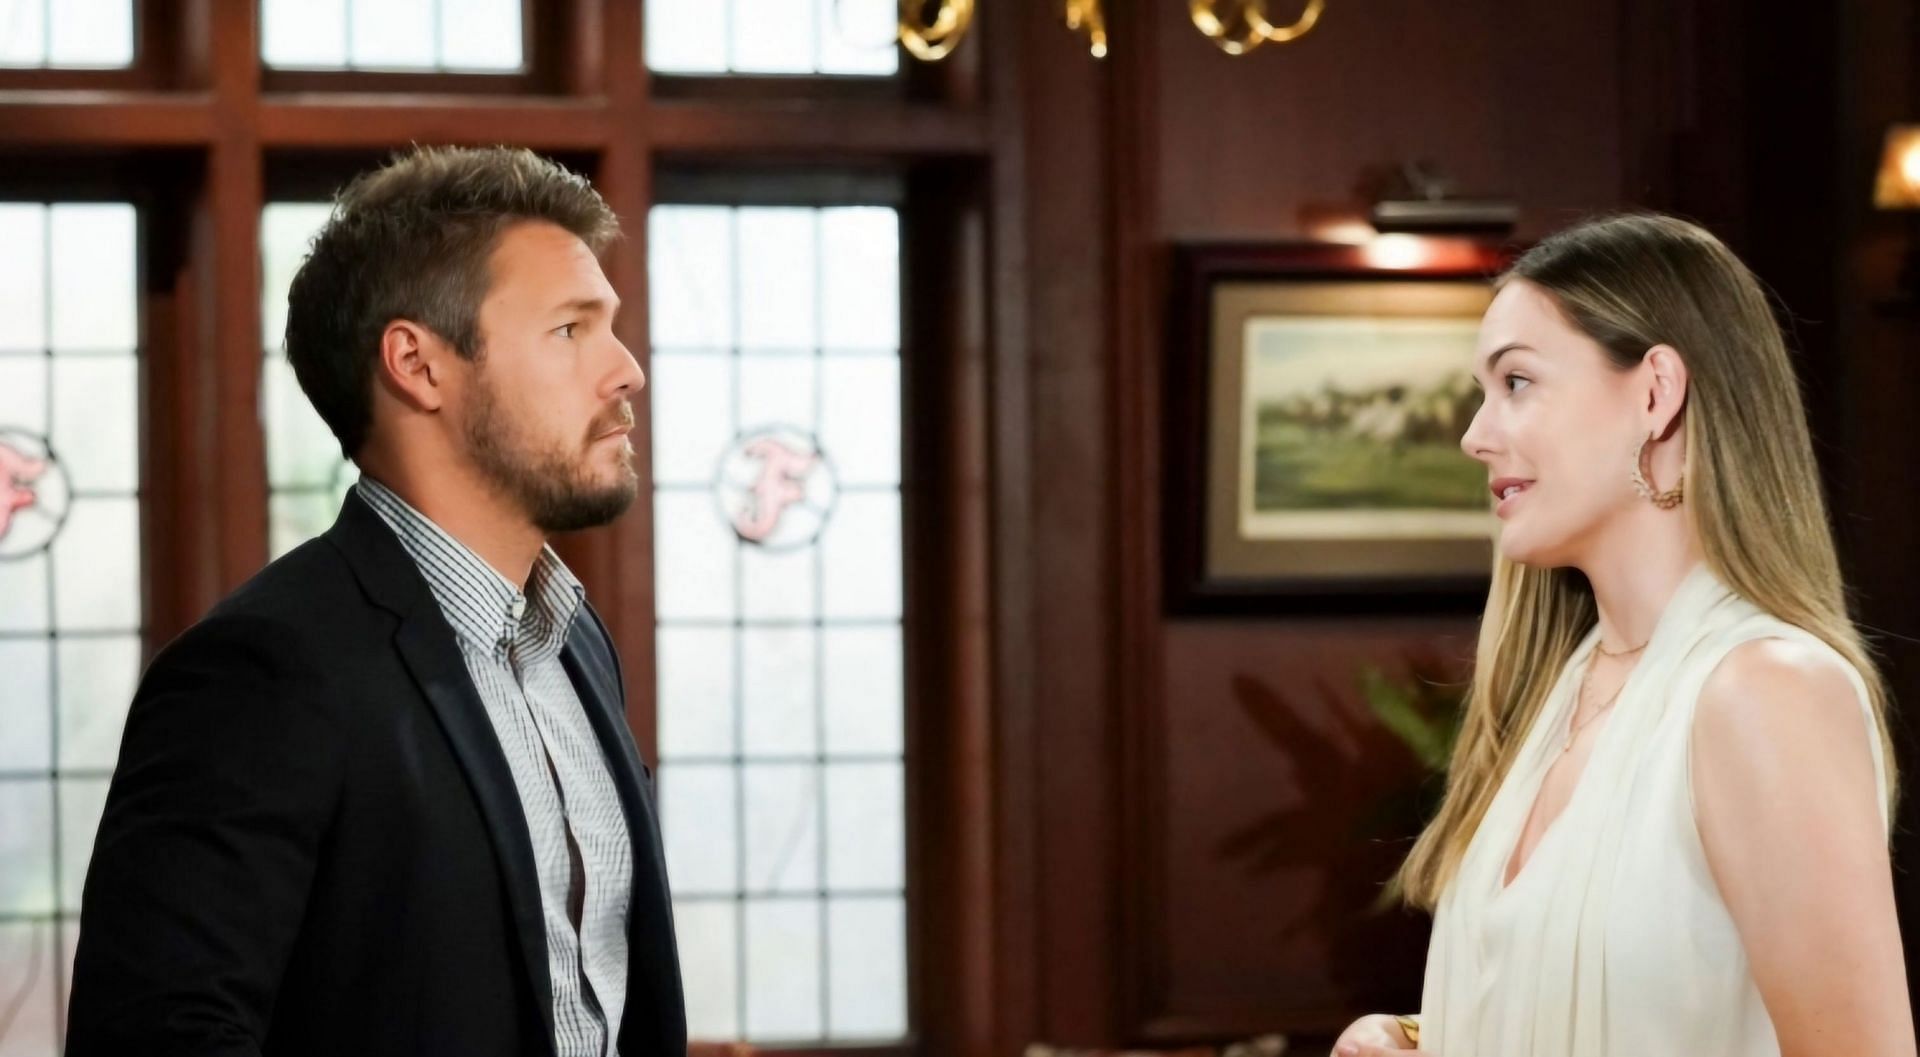 Annika Noelle as Hope and Scott Clifton as Liam on The Bold and the Beautiful (via CBS Photo Archive)